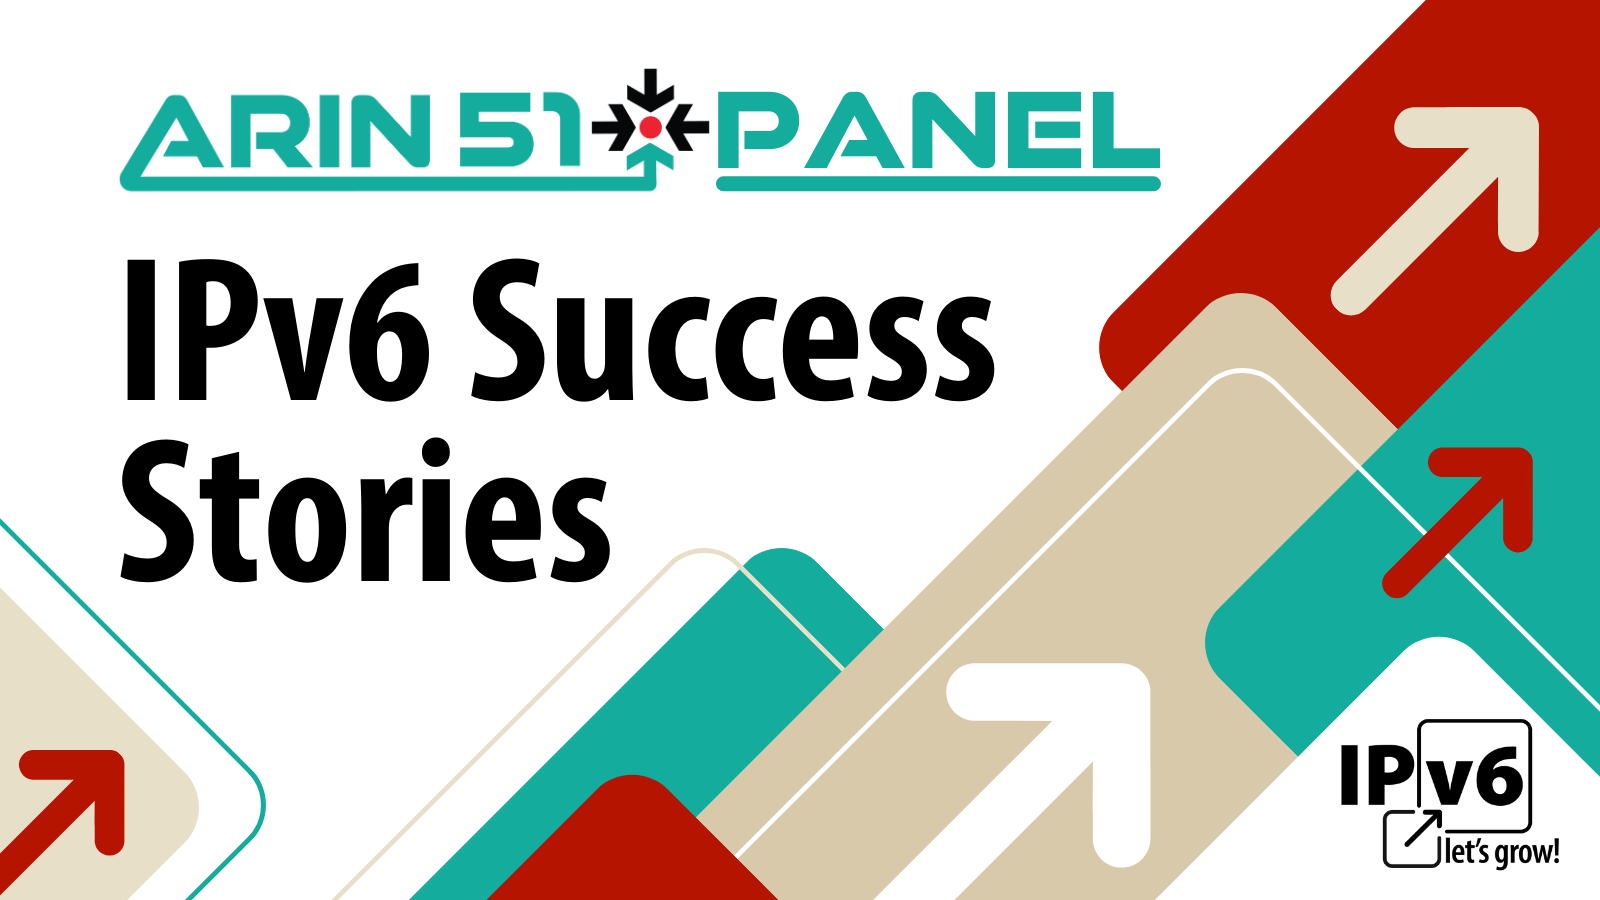 Read the blog IPv6 Success Stories Shared in ARIN 51 Panel